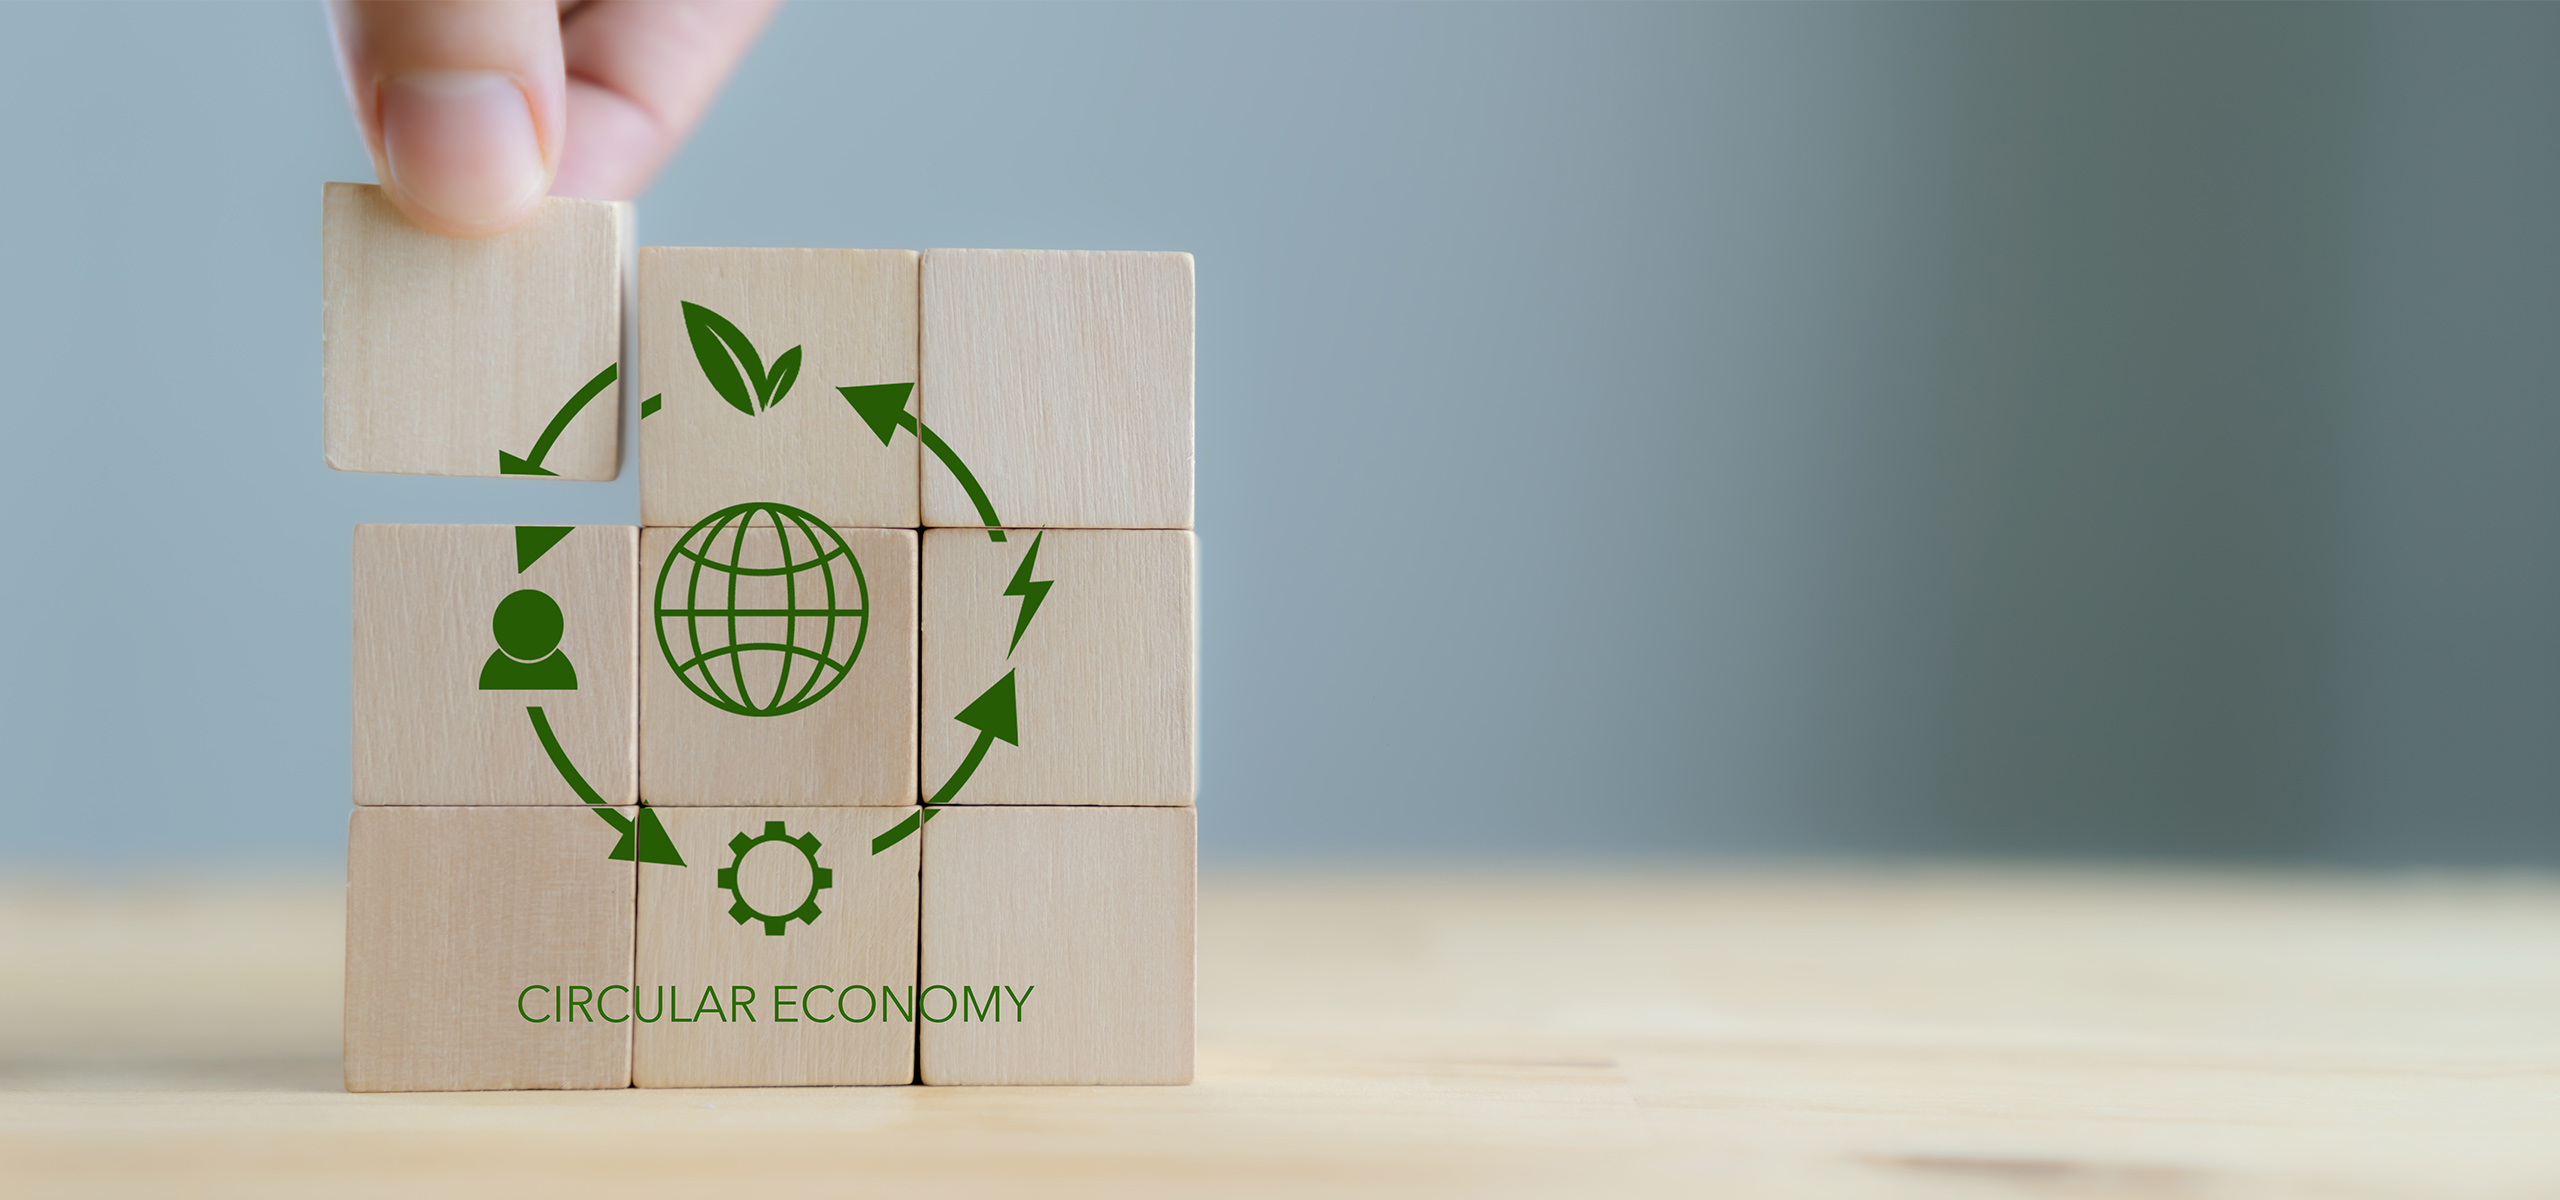 A hand picks up one of the wooden blocks with the words and images 'CIRCULAR ECONOMY' on them